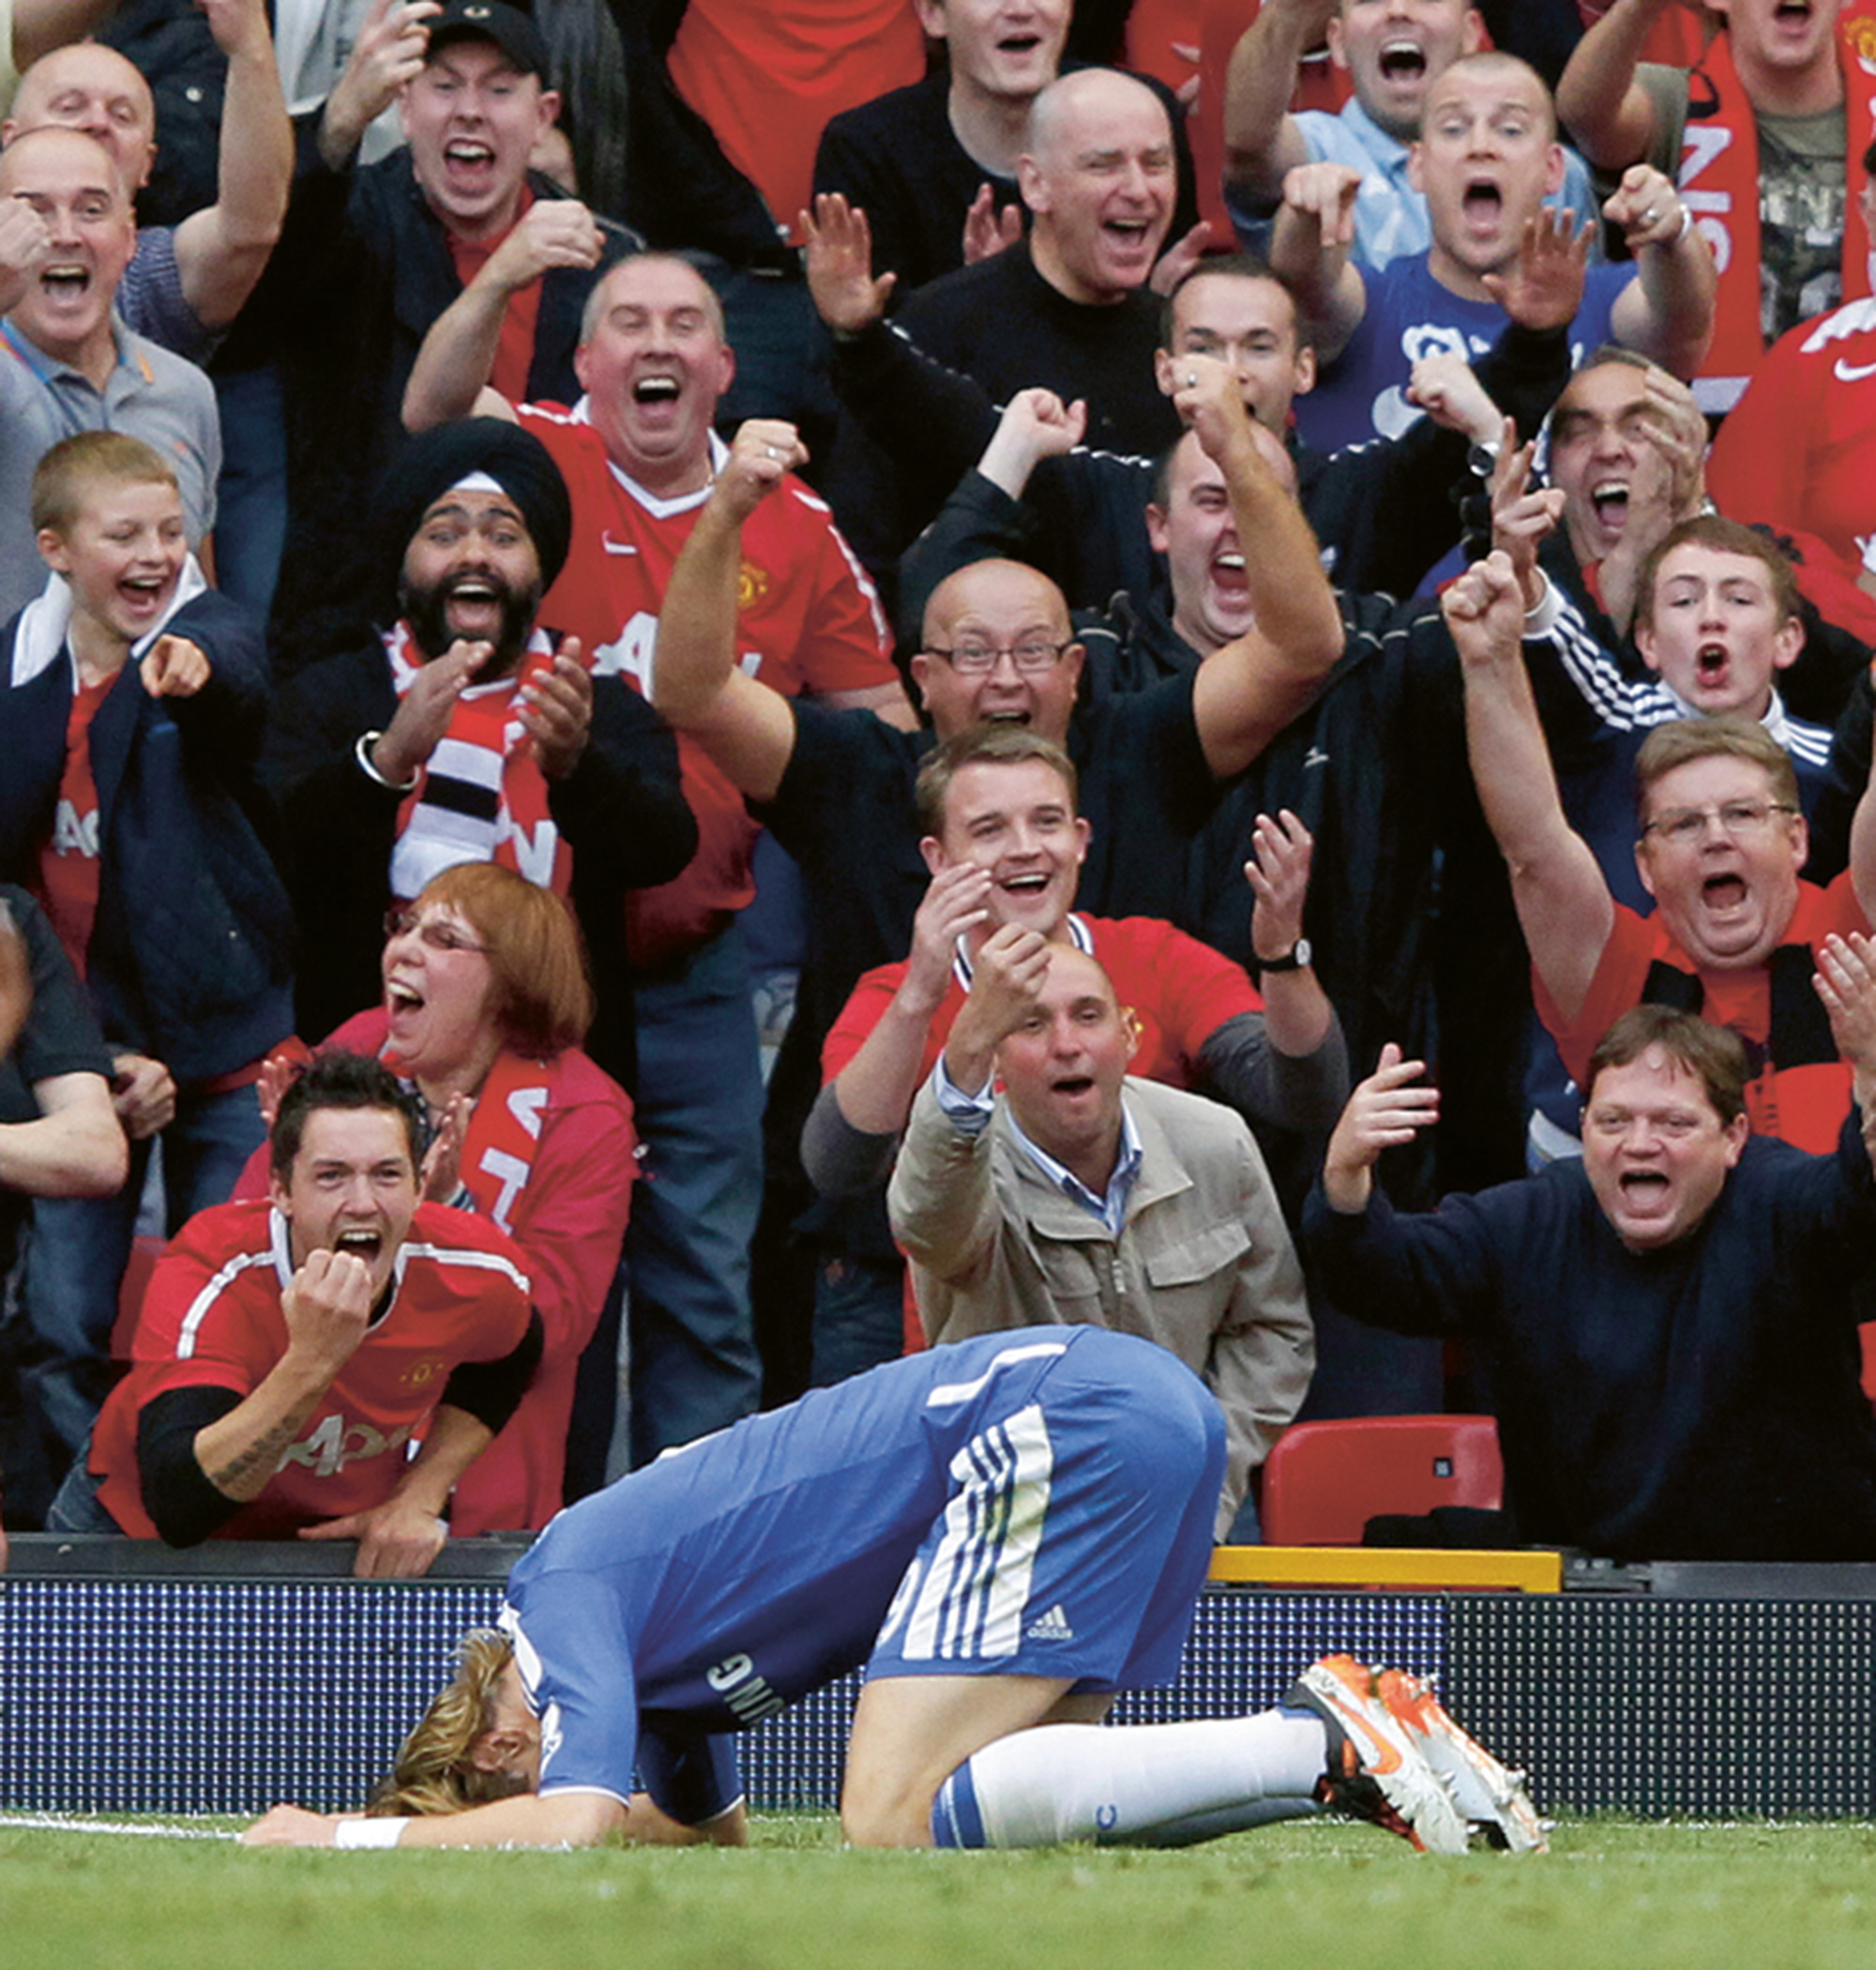 A photograph of soccer player Fernando Torres kneeling face-down on the pitch as fans from the opposite team jeer in the stalls behind him. 